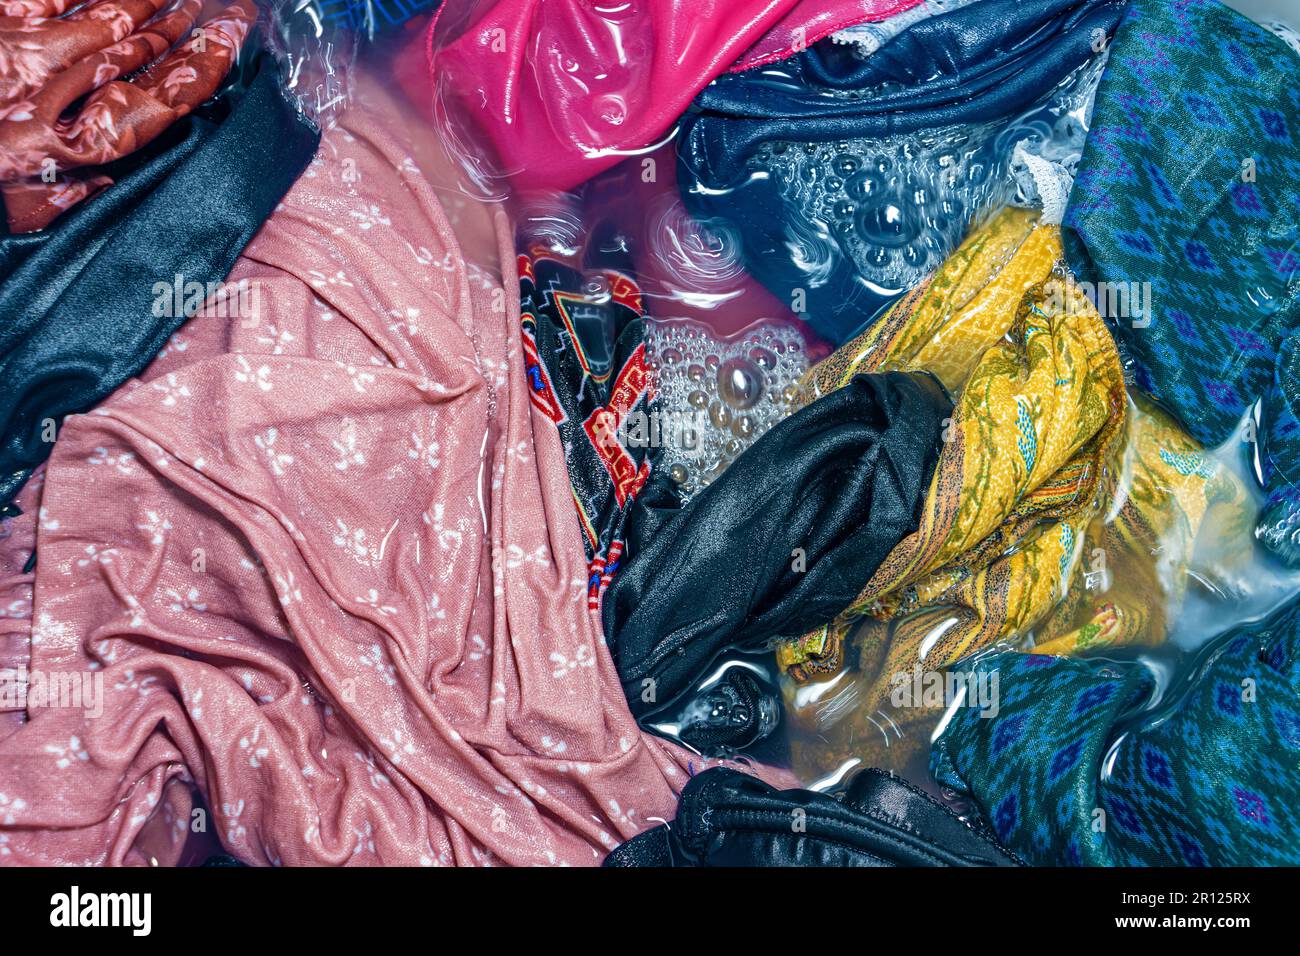 Laundry soaked in water is ready for washing procedure Stock Photo